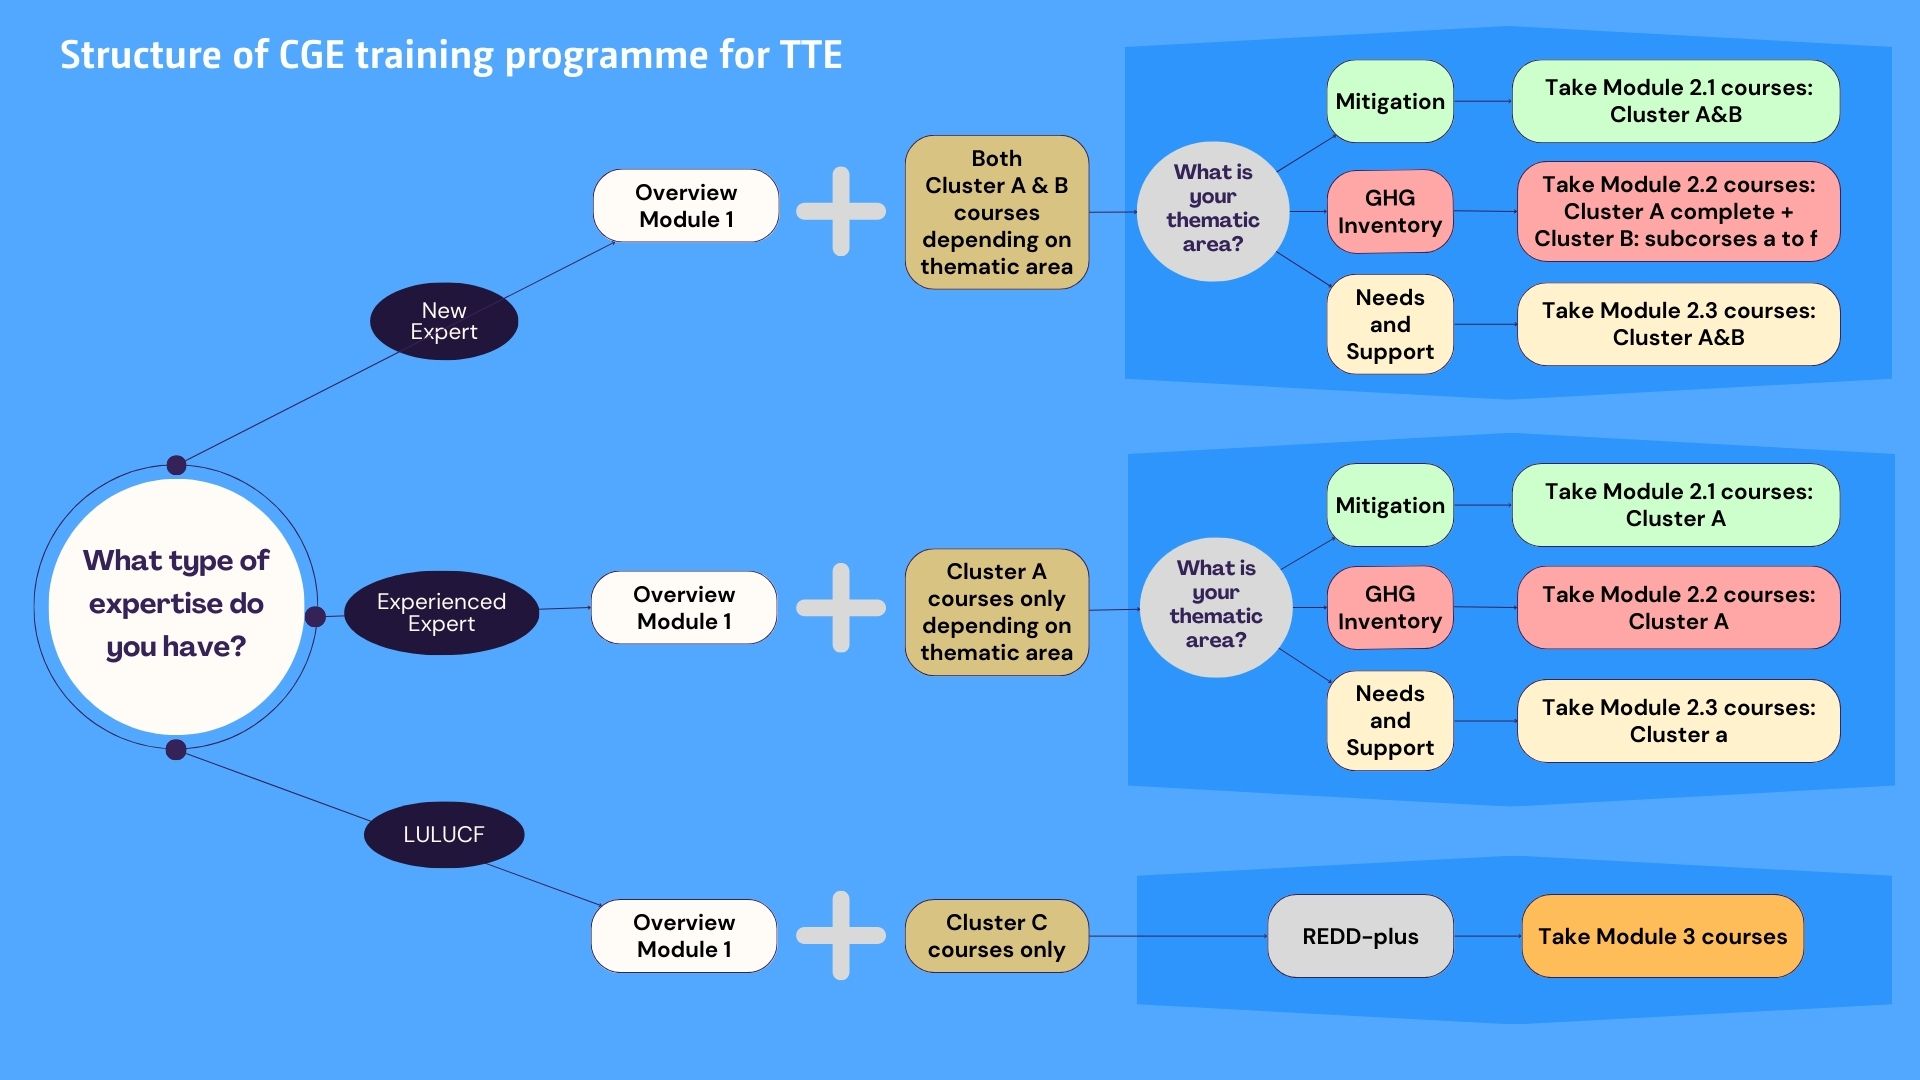 Structure of CGE training programme for TTE